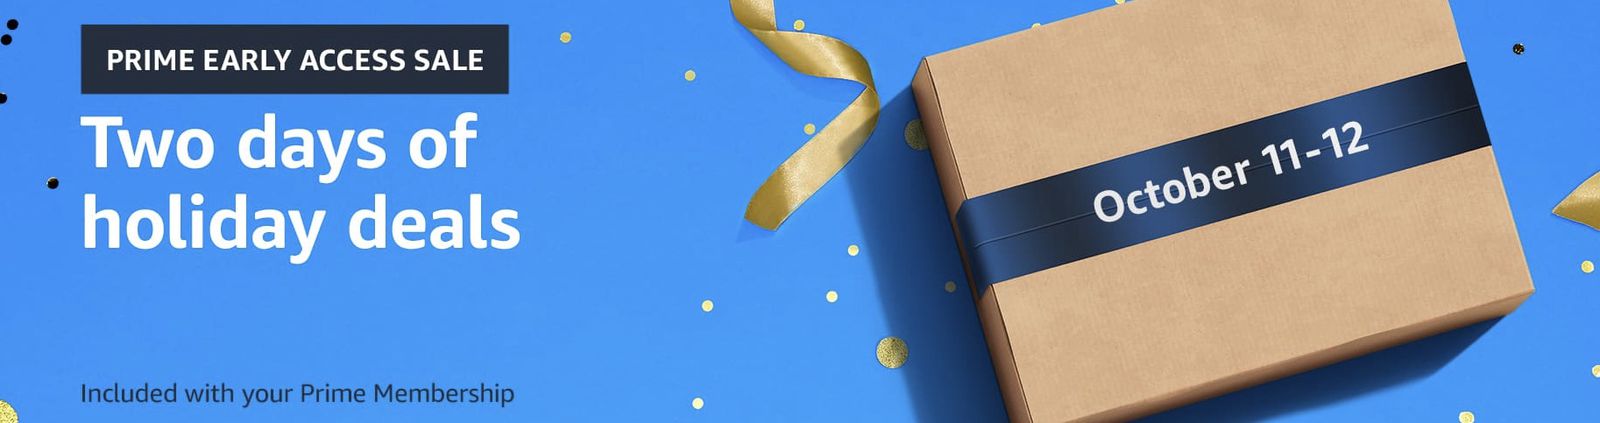 Early Access live updates: Best October Prime Day deals